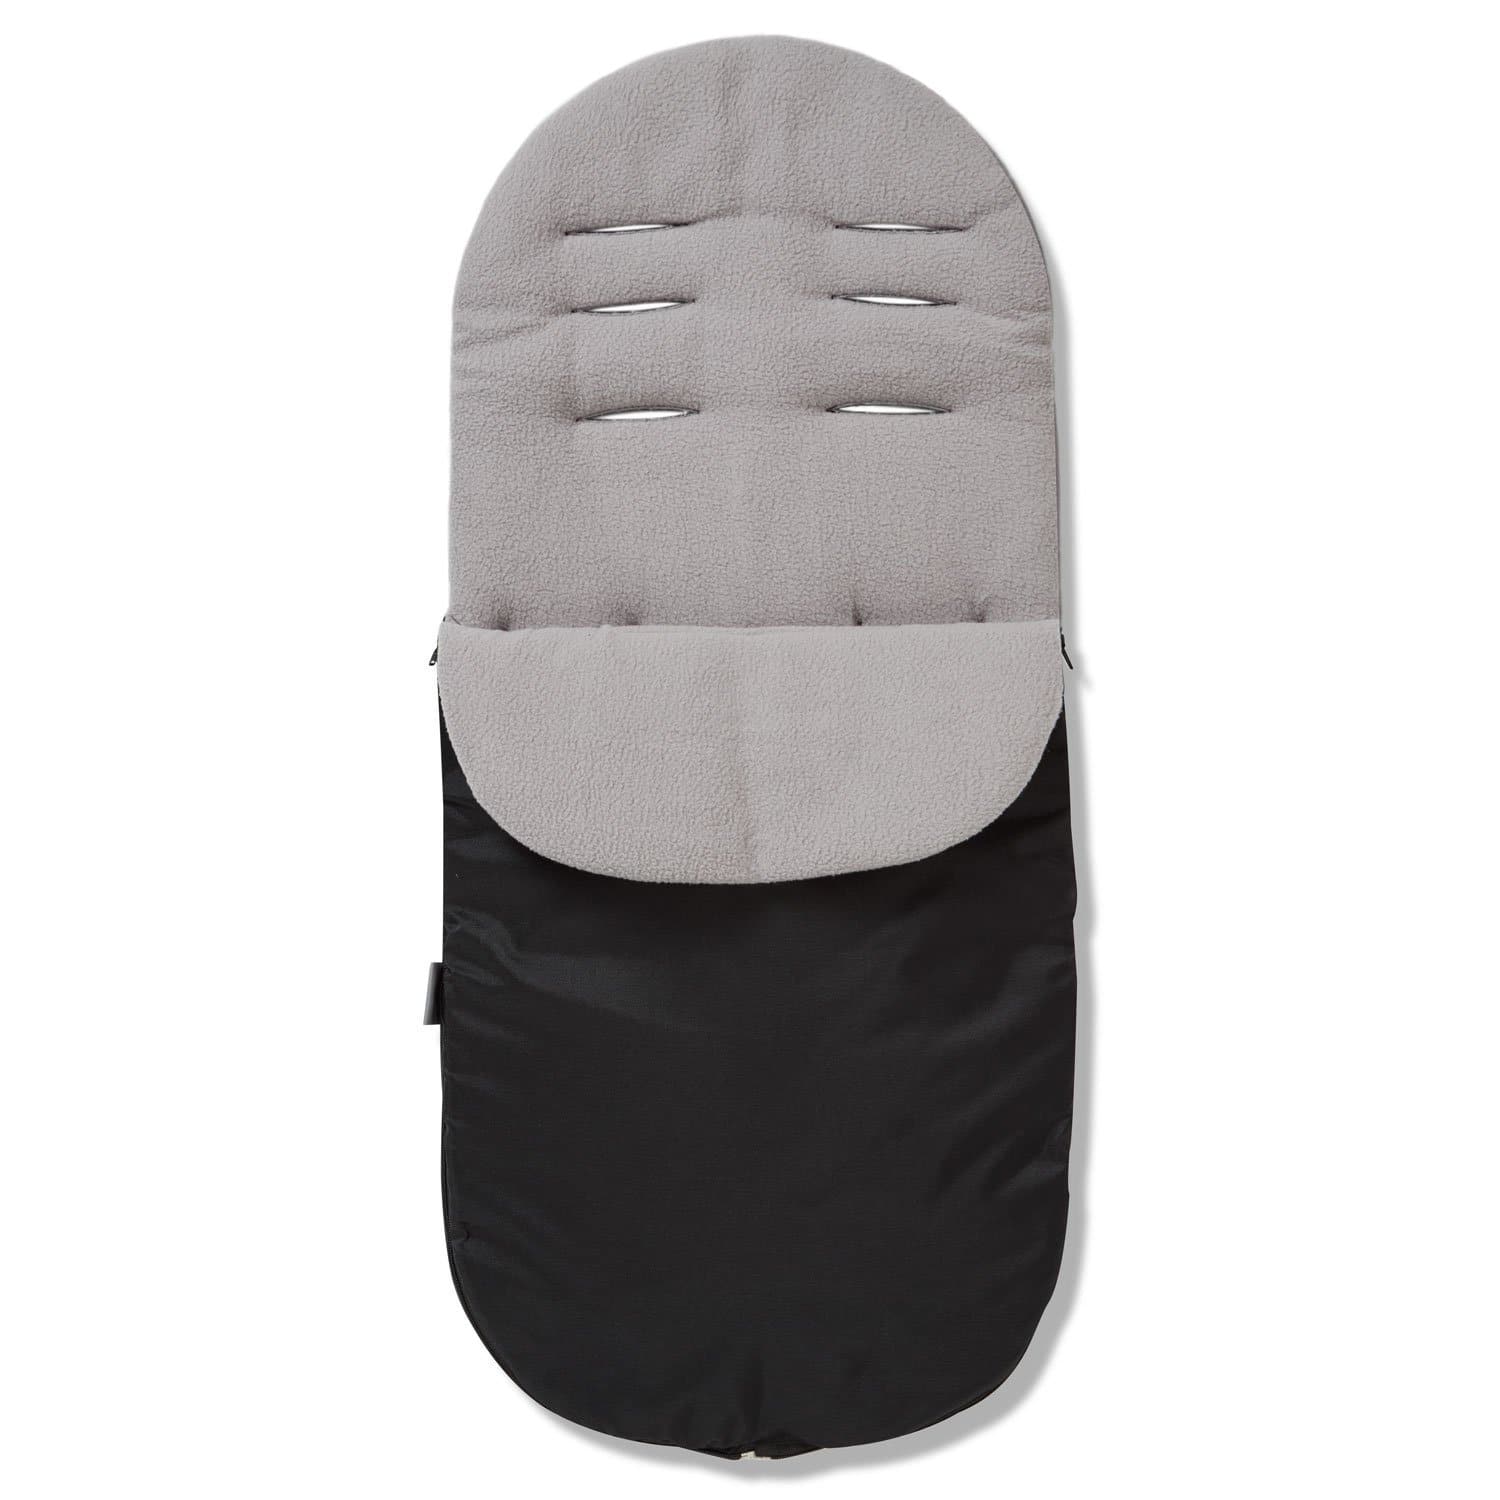 Footmuff / Cosy Toes Compatible with Noukies - For Your Little One